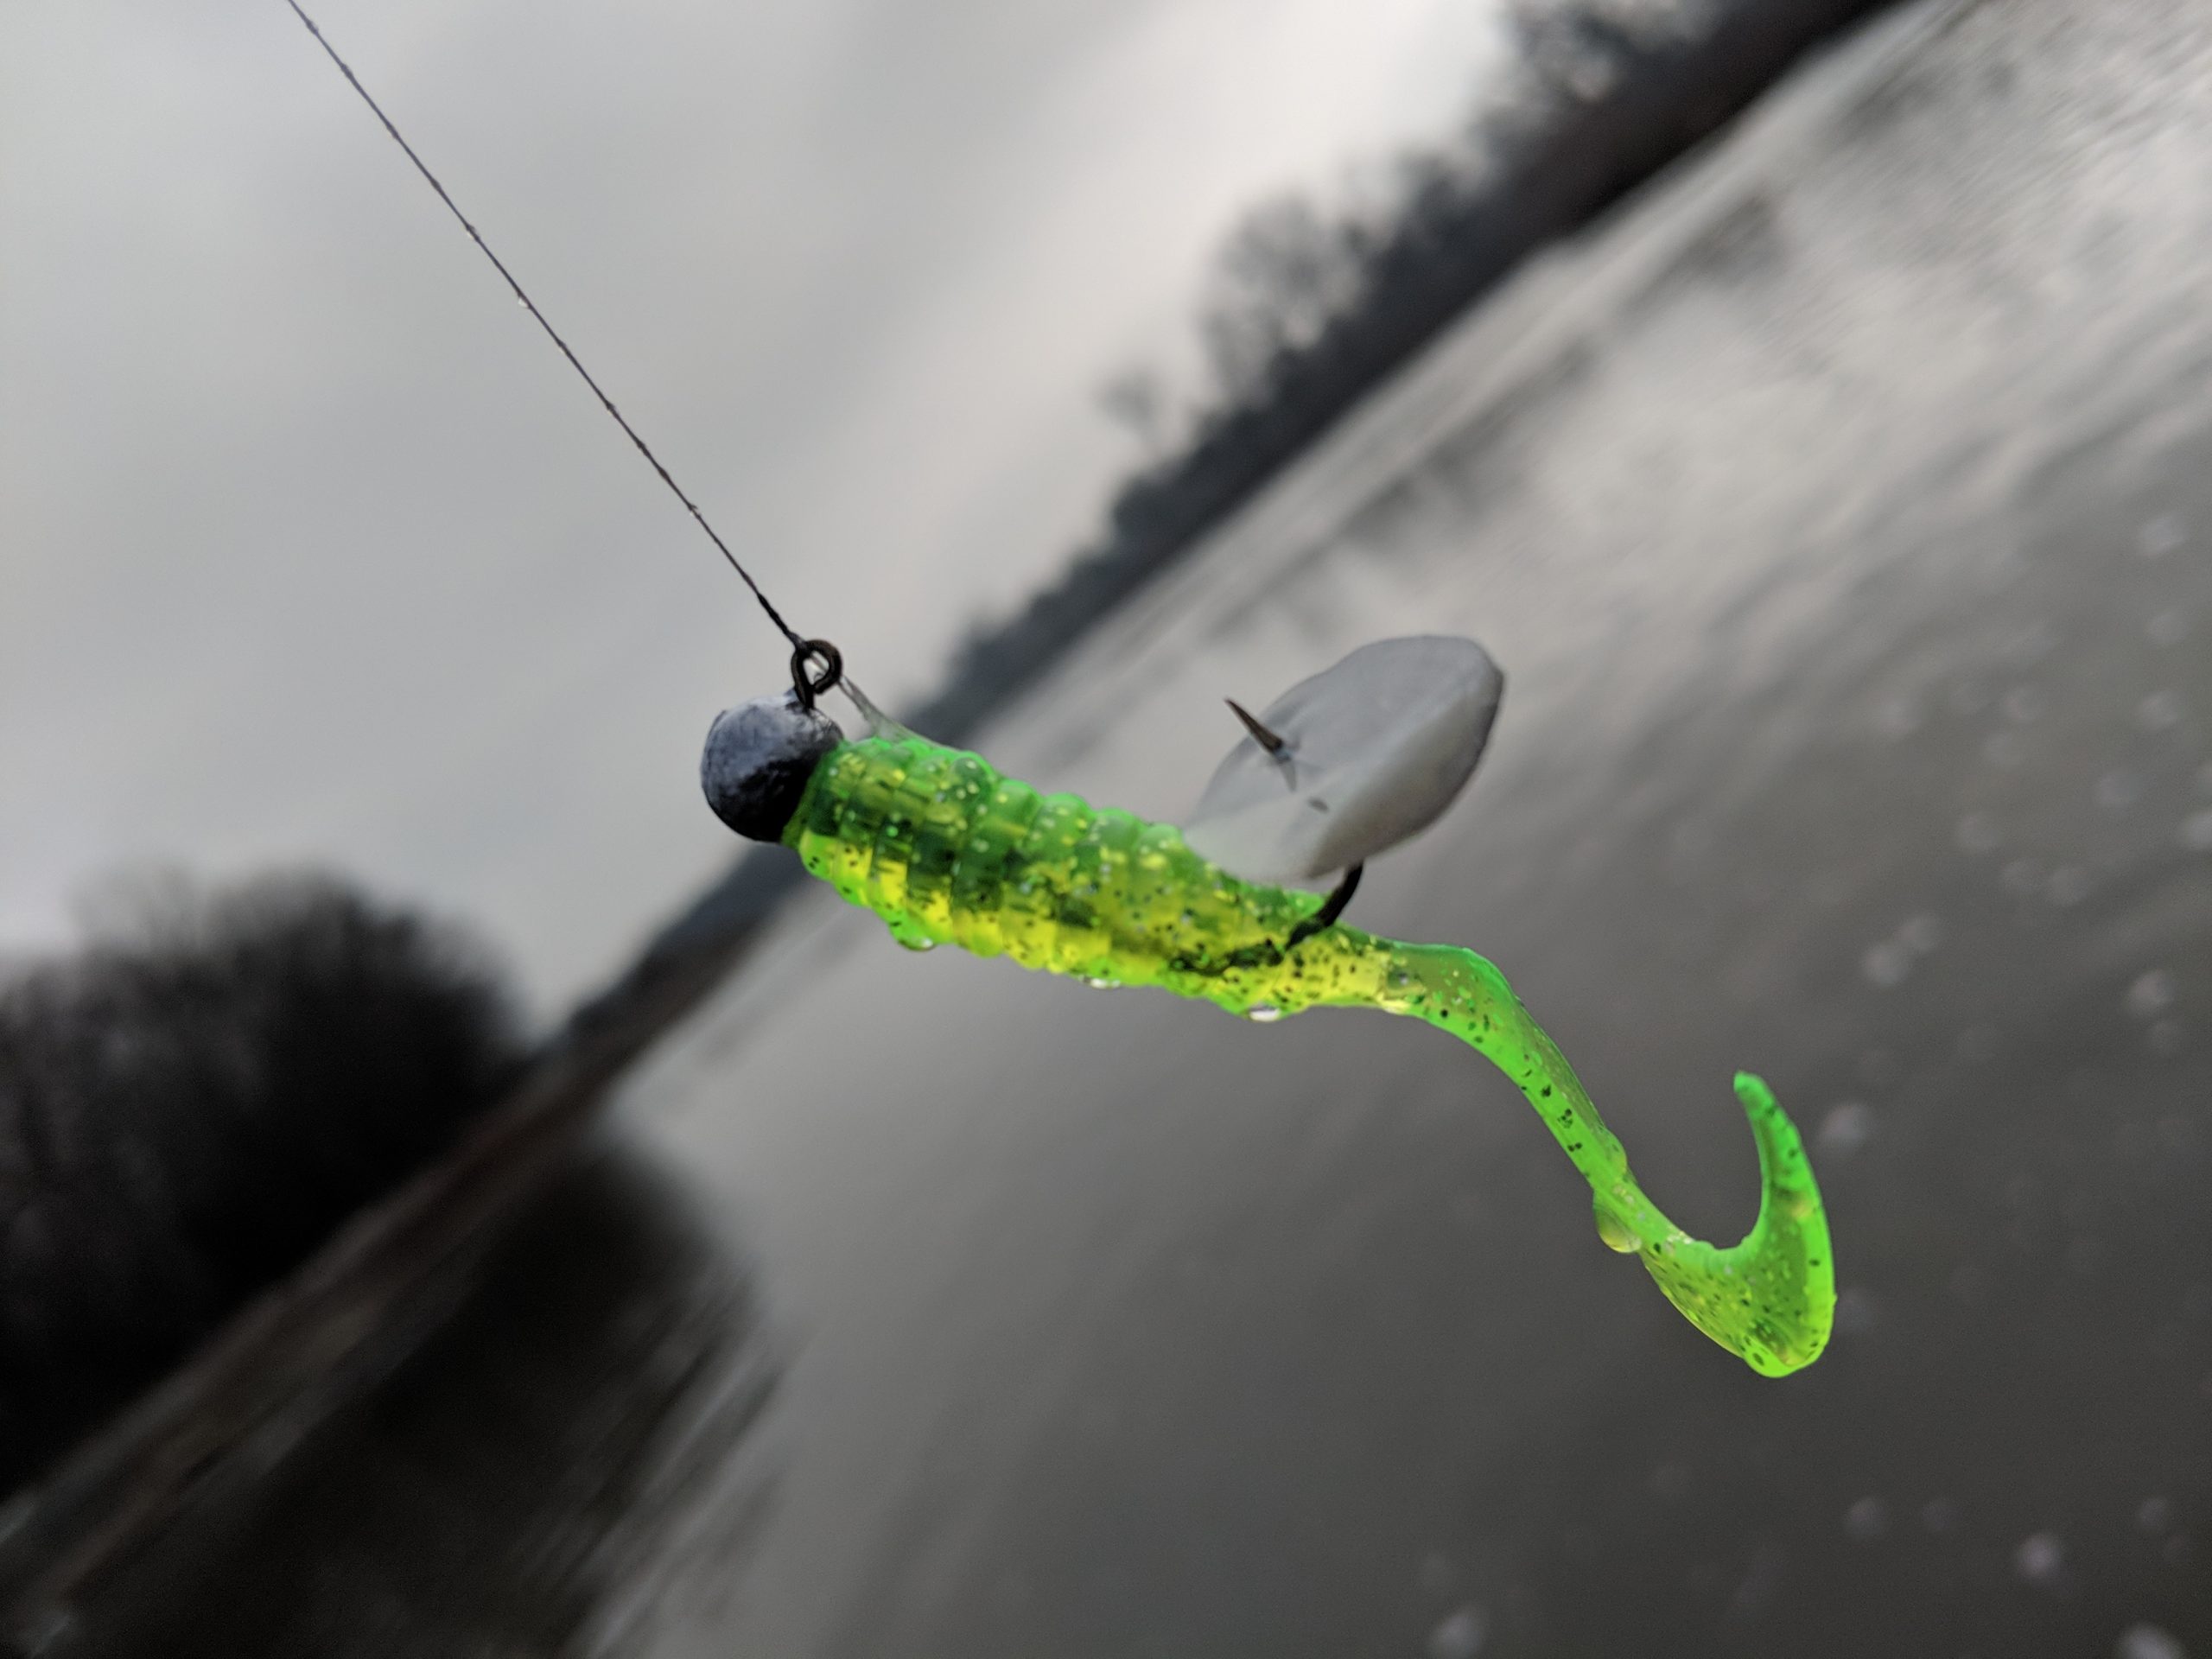 Maumee River Report- December 30, 2019